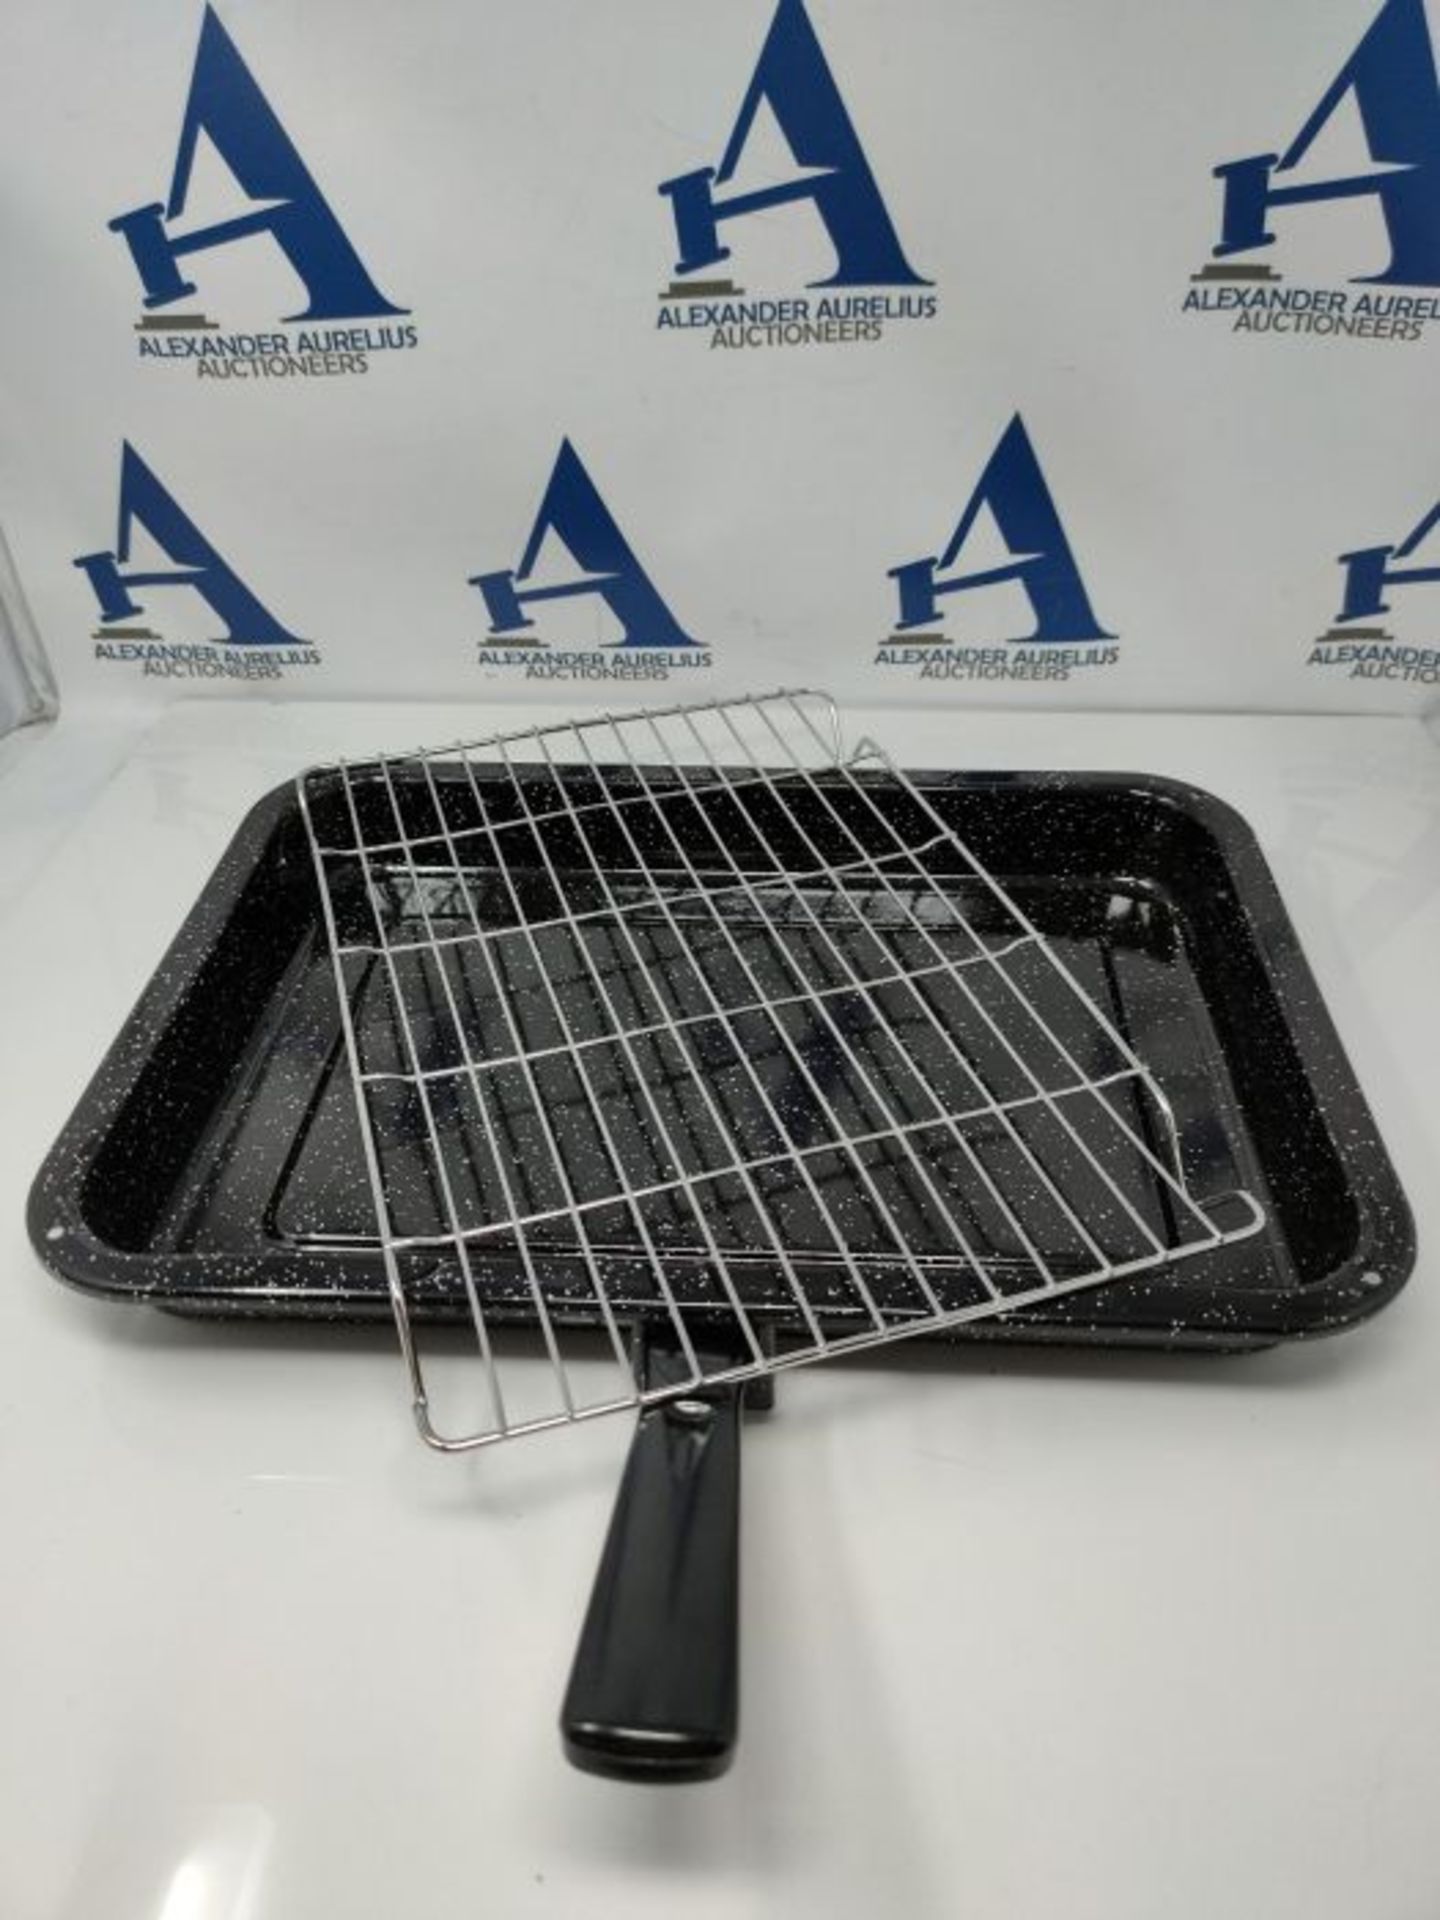 Durable Universal Oven Cooker Grill Pan Rack & Detachable Handle 380 x 280mm - Image 3 of 3